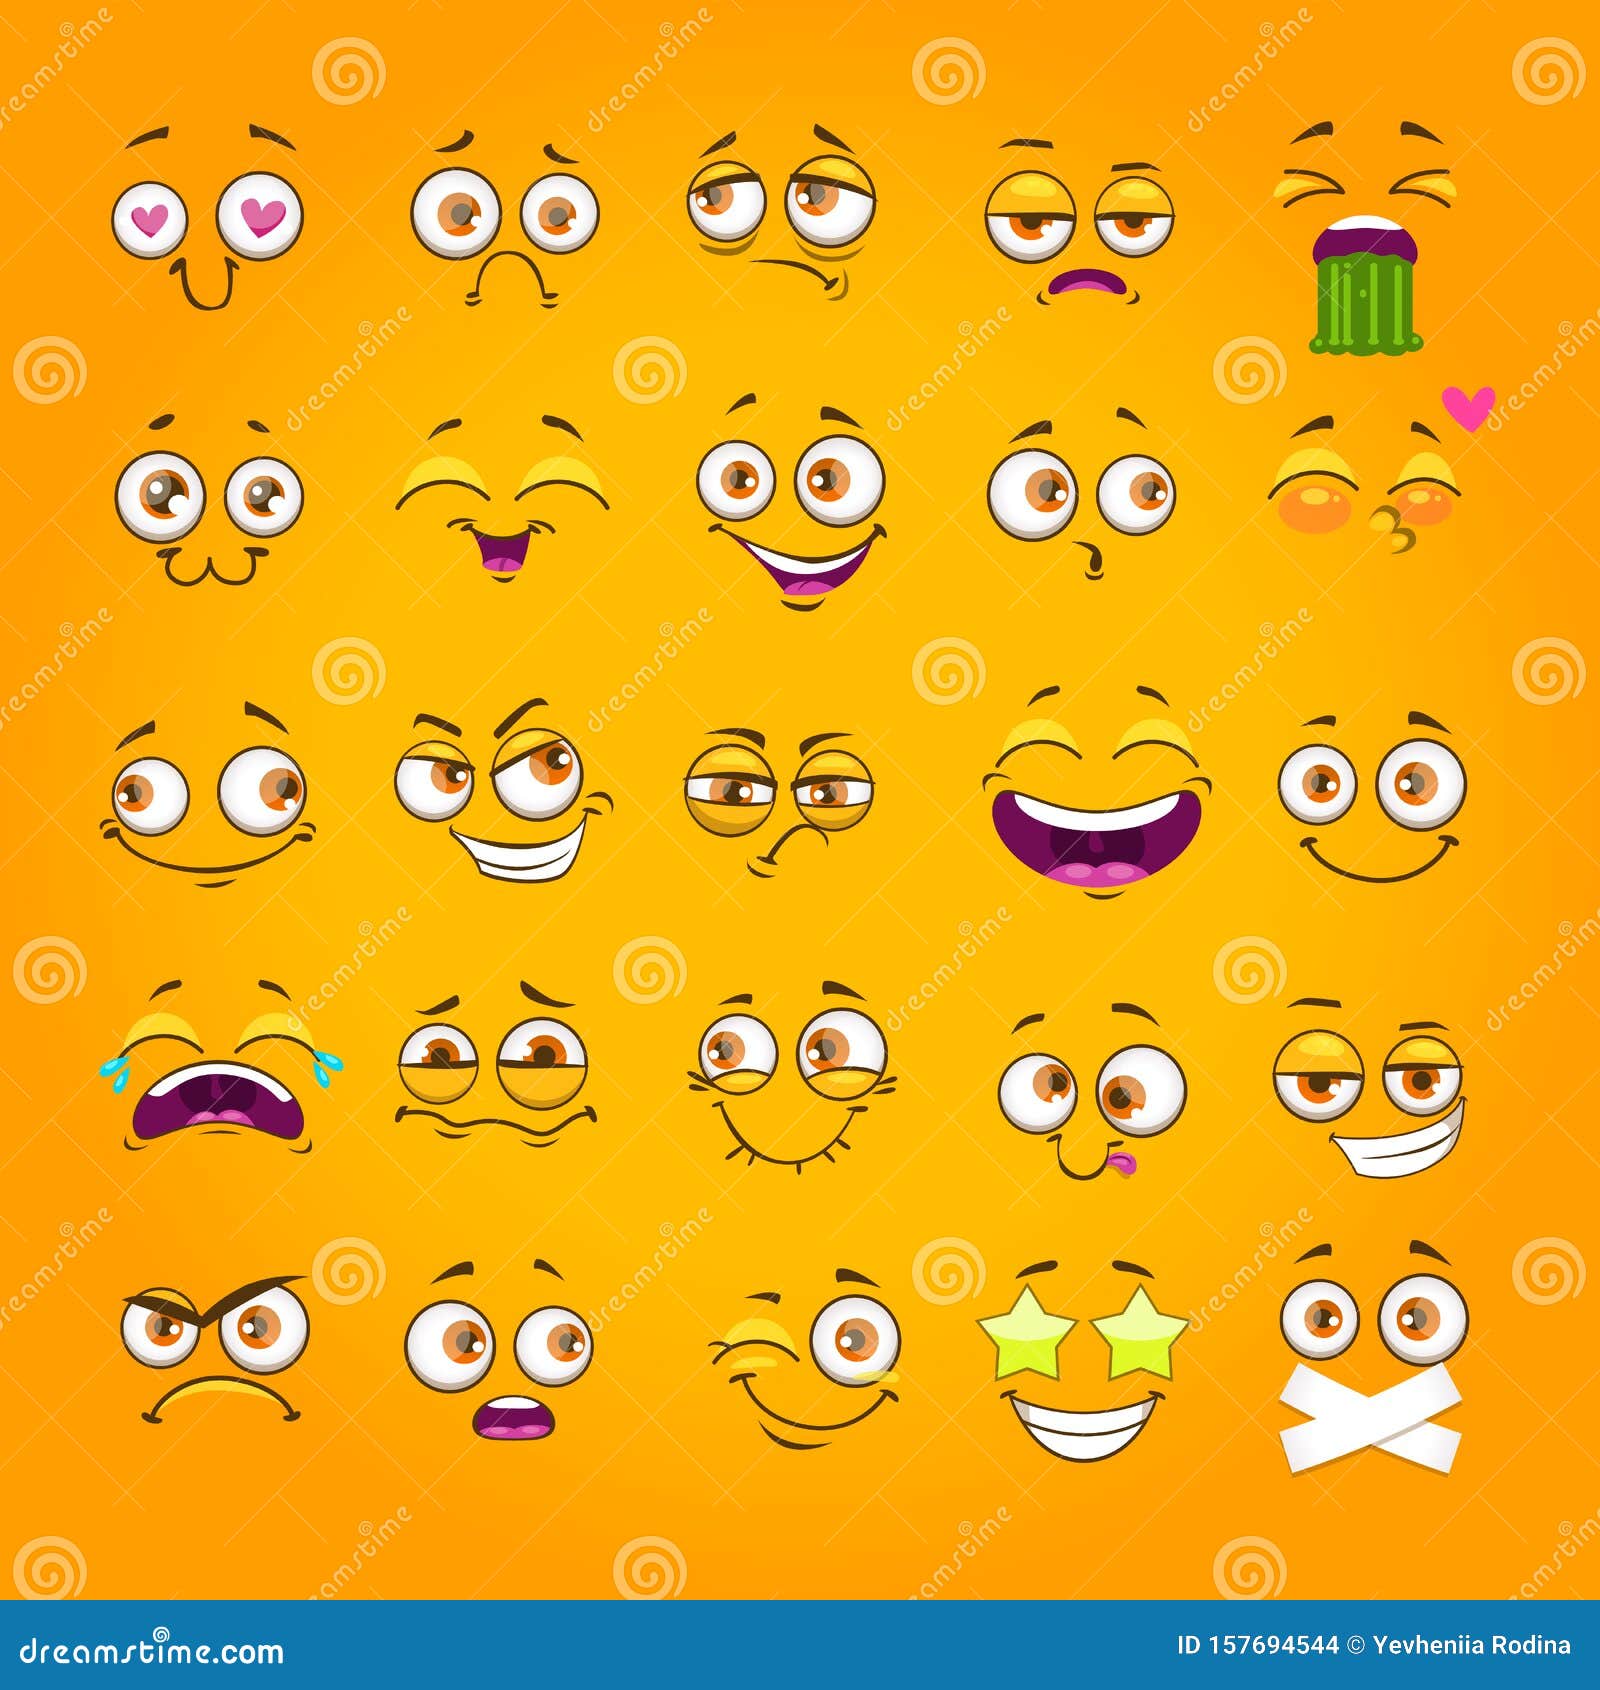 Humorous Emoji Set. Emoticon Face Collection. Funny Cartoon Comic Faces on  Yellow Background Stock Vector - Illustration of icon, face: 157694544